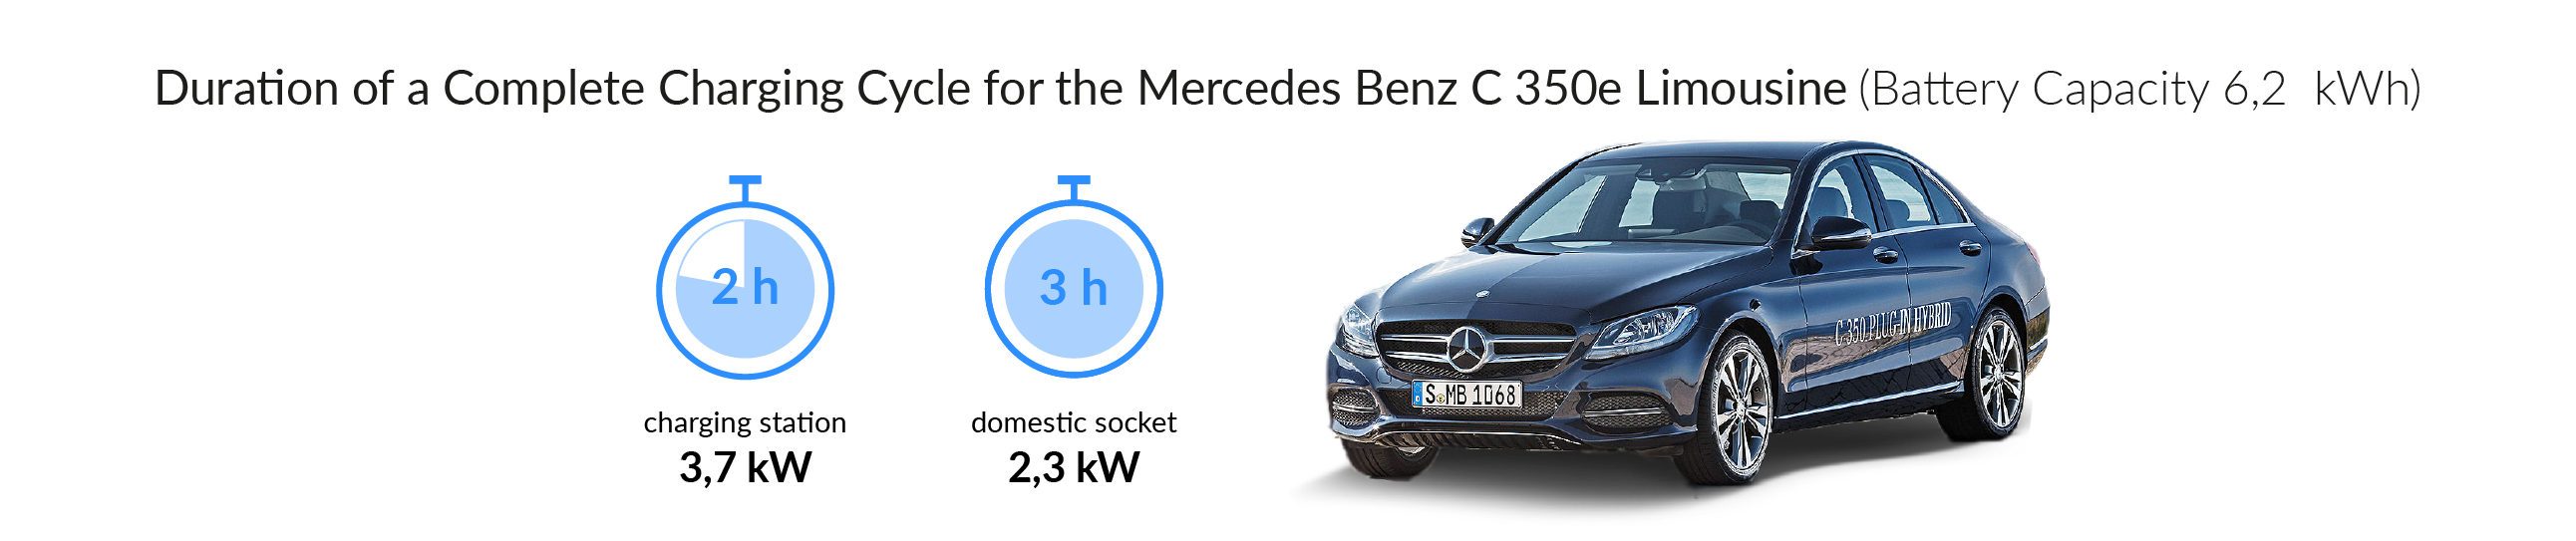 Charging time for the Mercedes-Benz C 350e 4MATIC